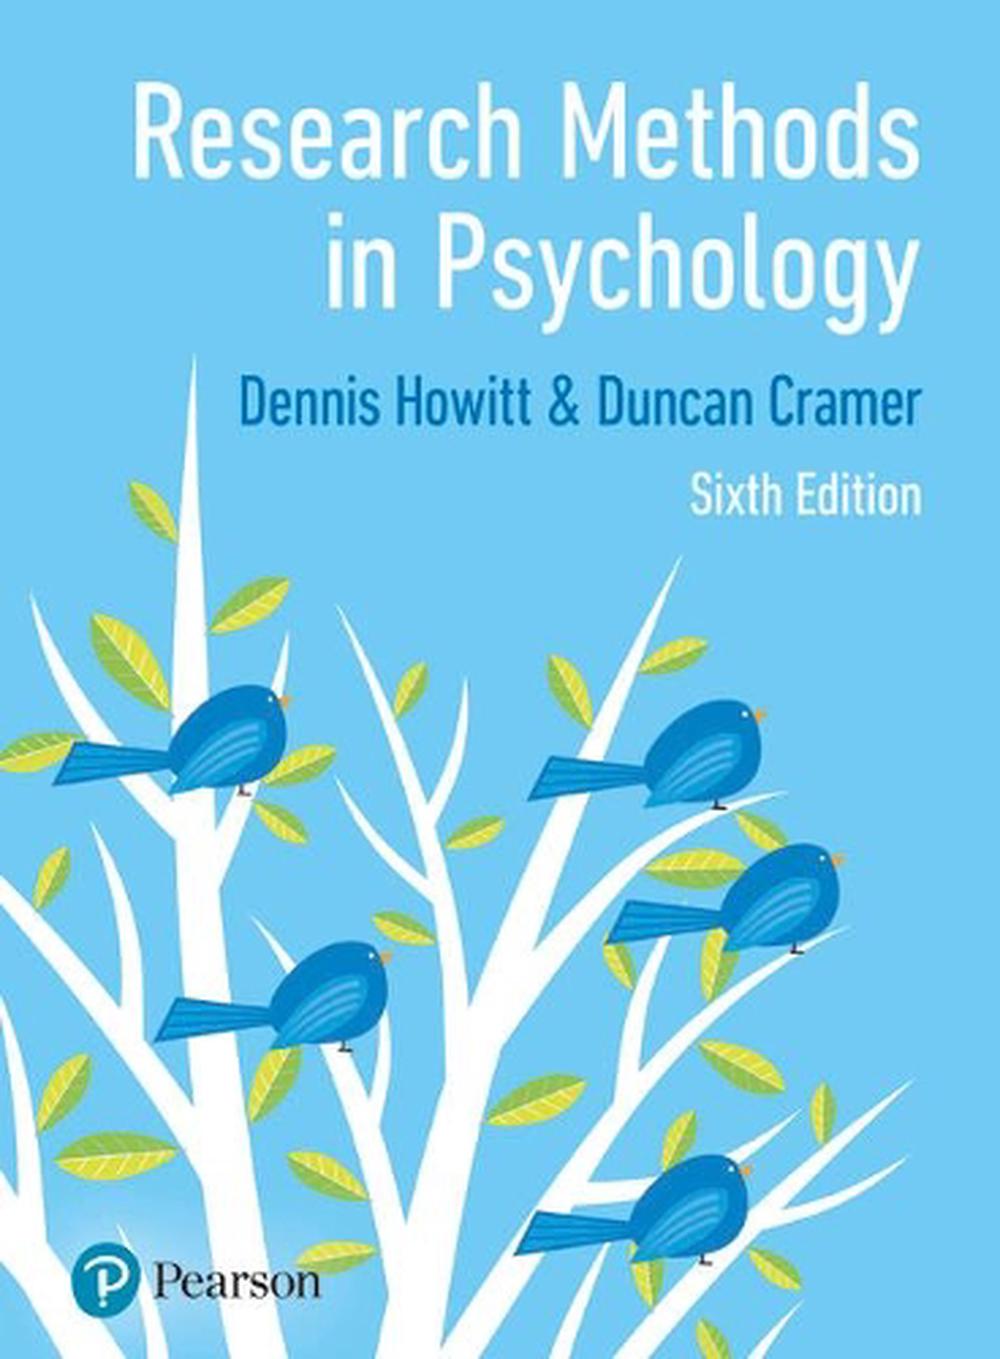 Research Methods in Psychology by Dennis Howitt (English) Paperback Book Free Sh 9781292276700